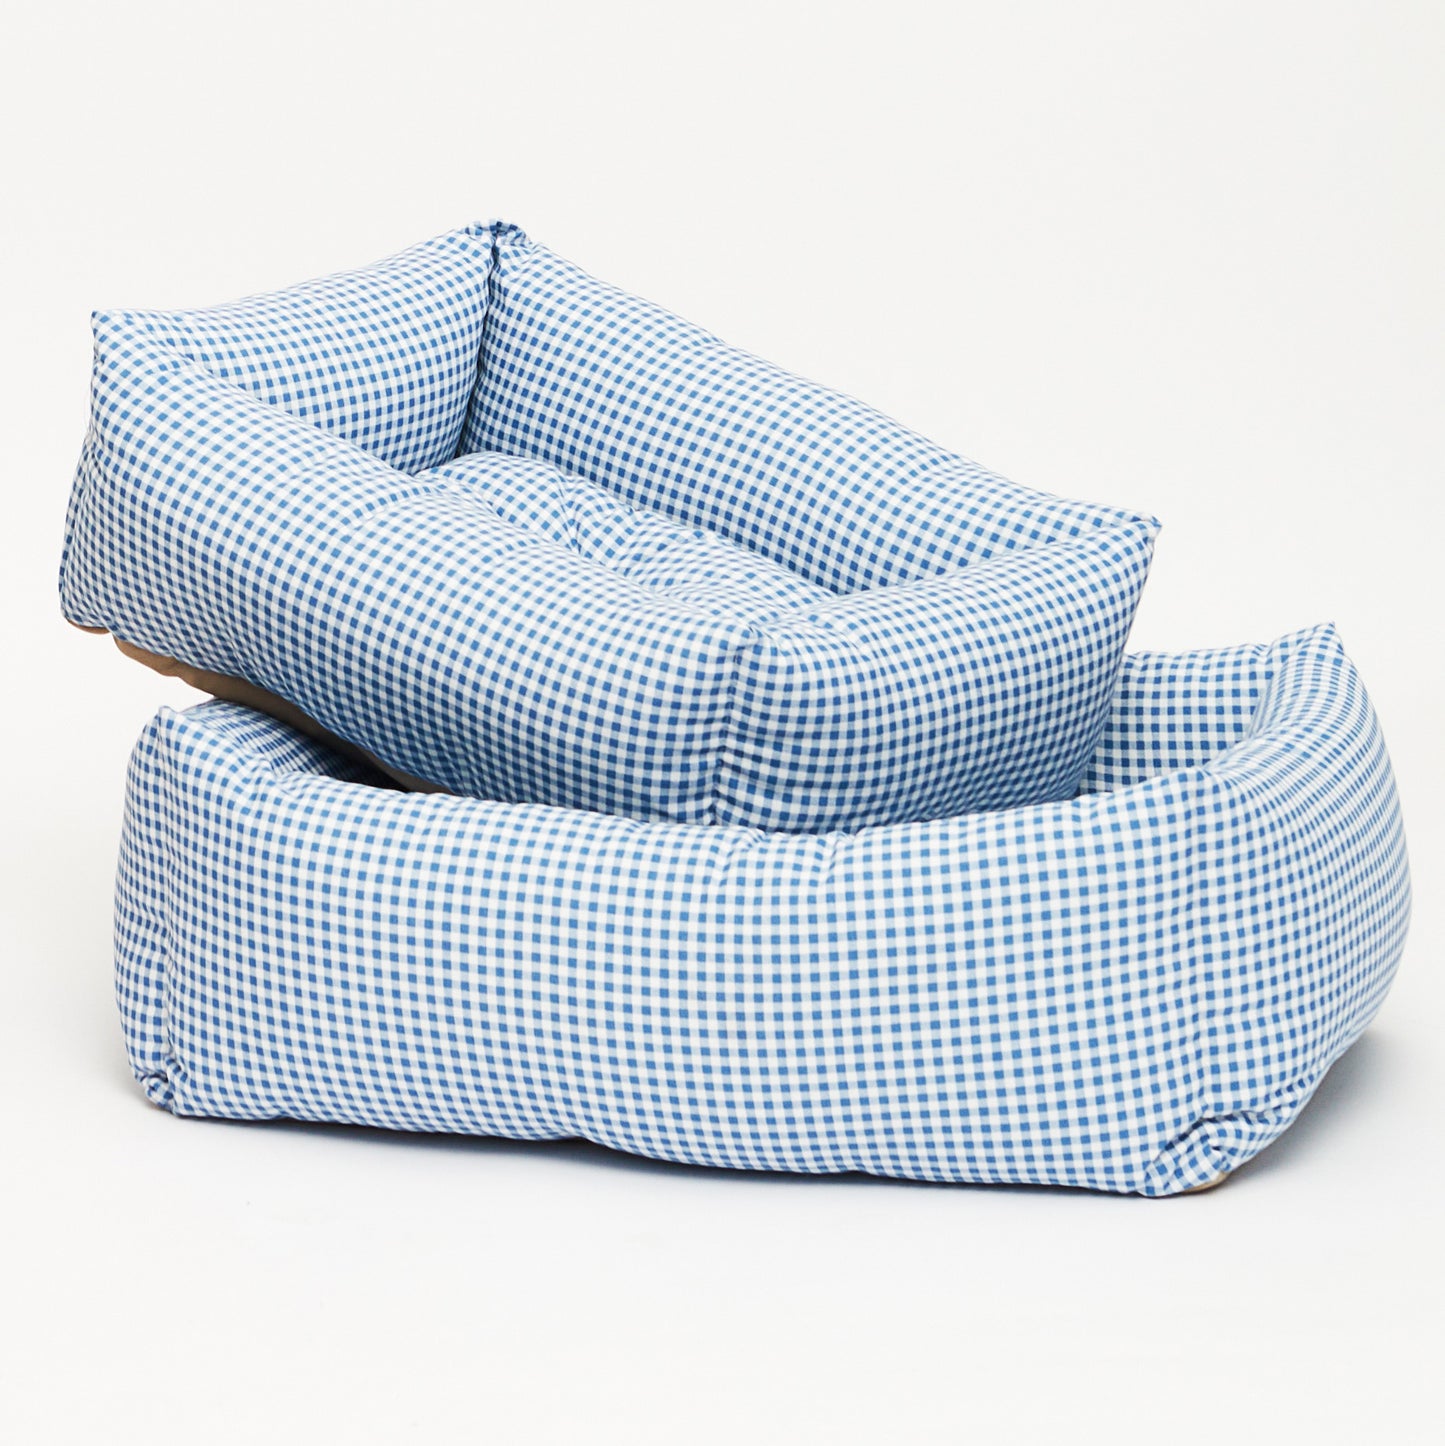 Blue Checked Cotton Bed - Waterproof Base